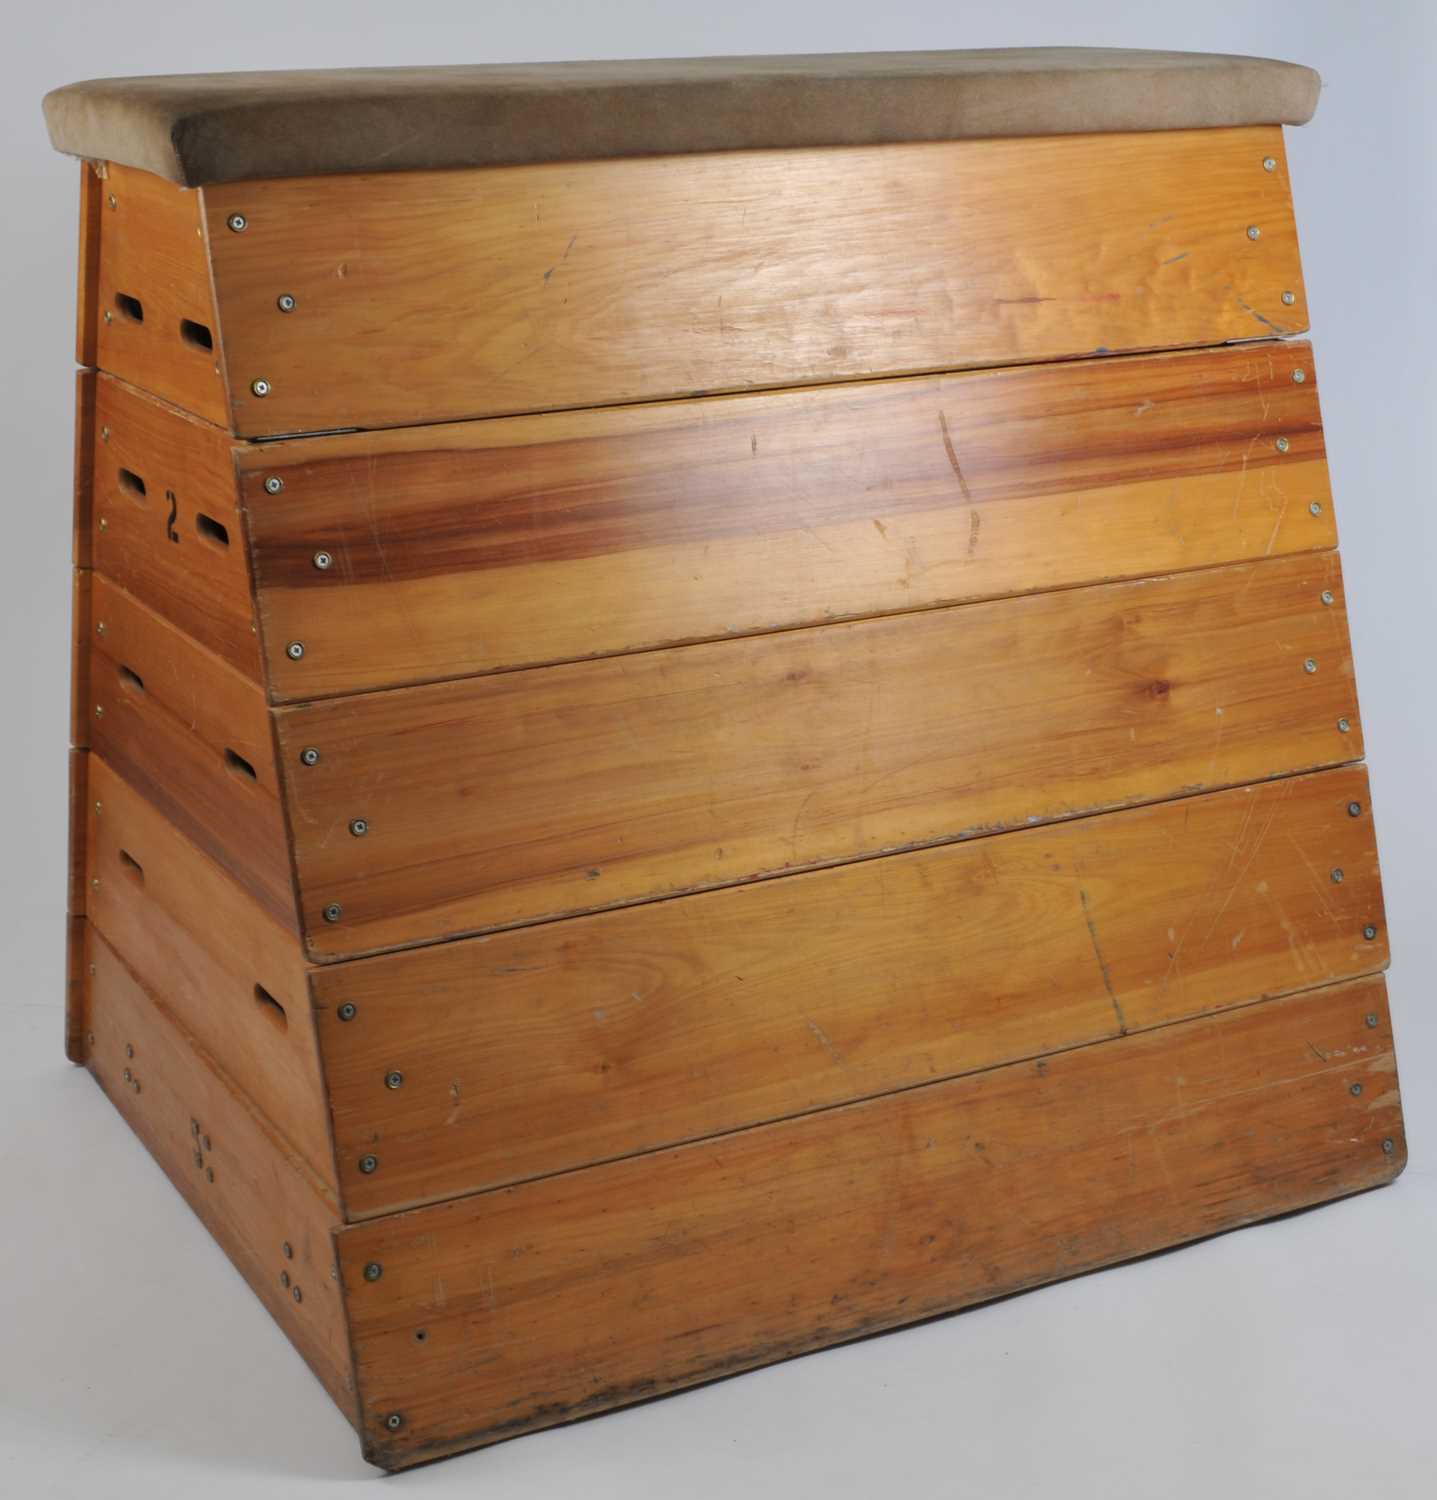 A 20th century five sectional school gym vaulting box